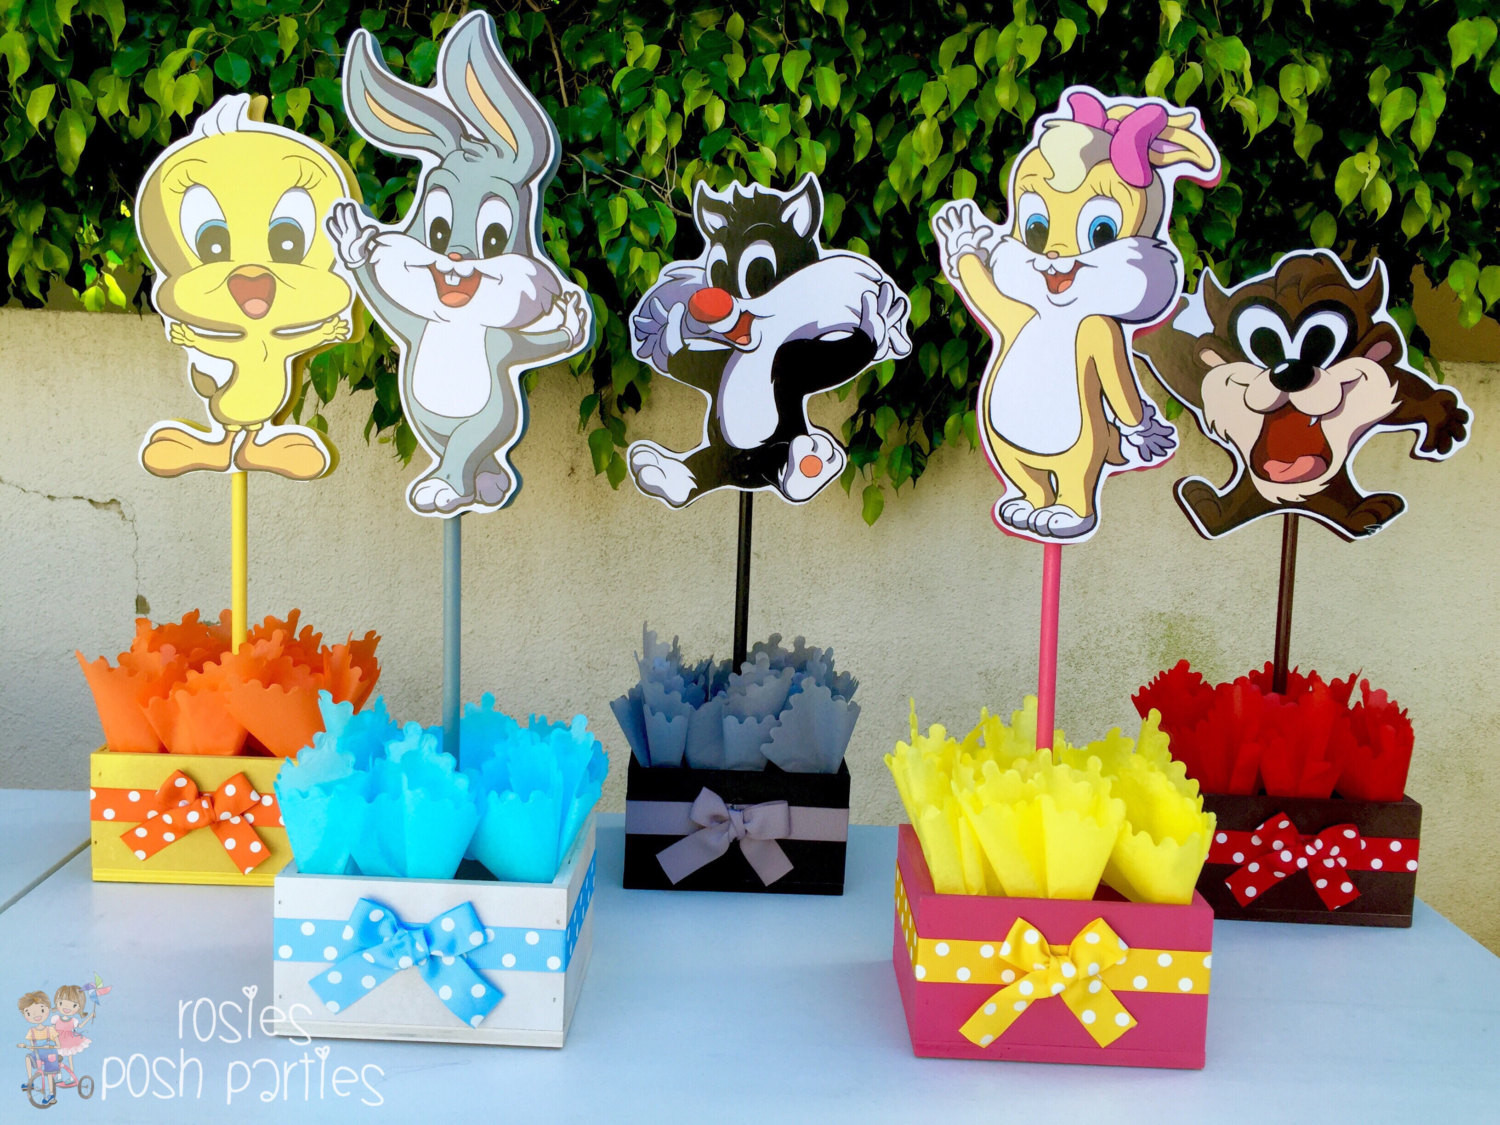 Baby Looney Tunes Party Decorations
 Baby Looney Tunes Baby Shower or 1st Birthday Inspired by Baby